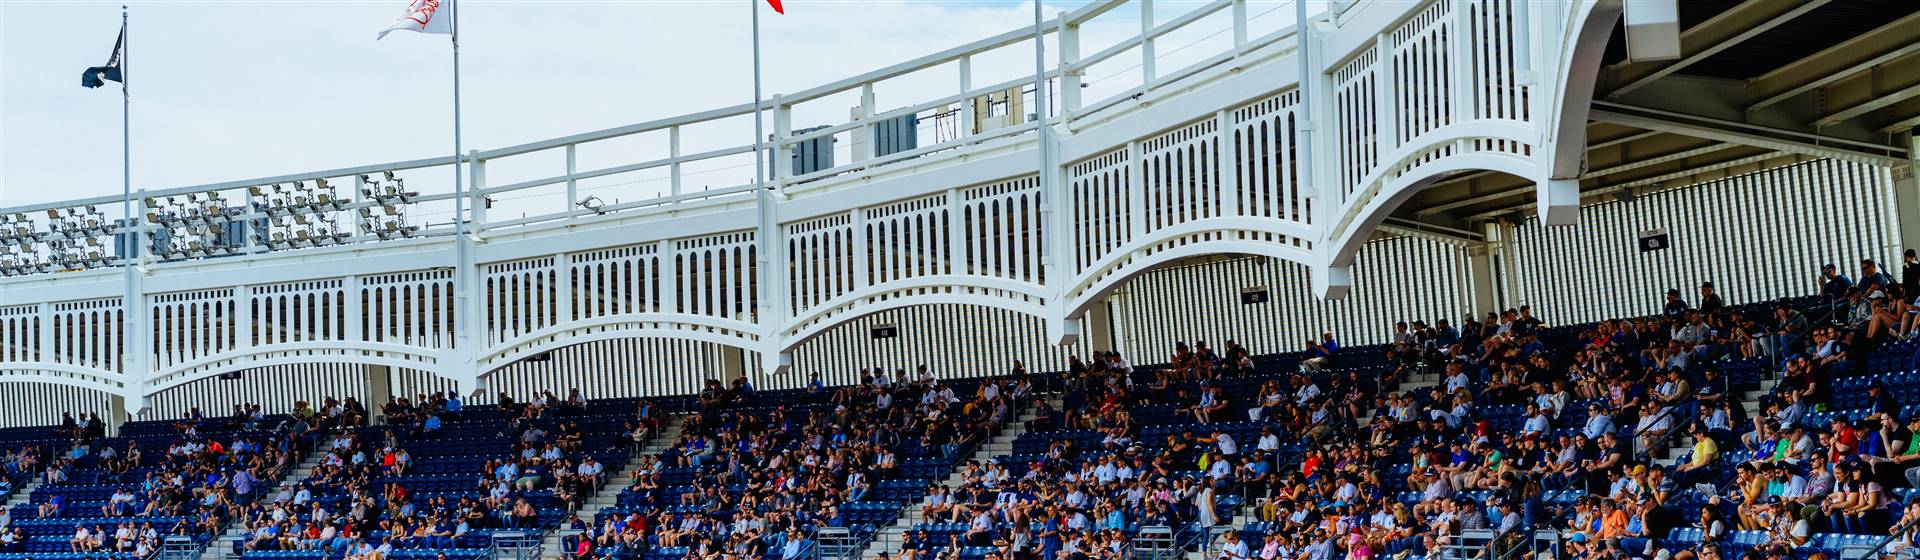 Join in for an evening full of family friendly fun as New York Yankees take on Boston Red Sox. 